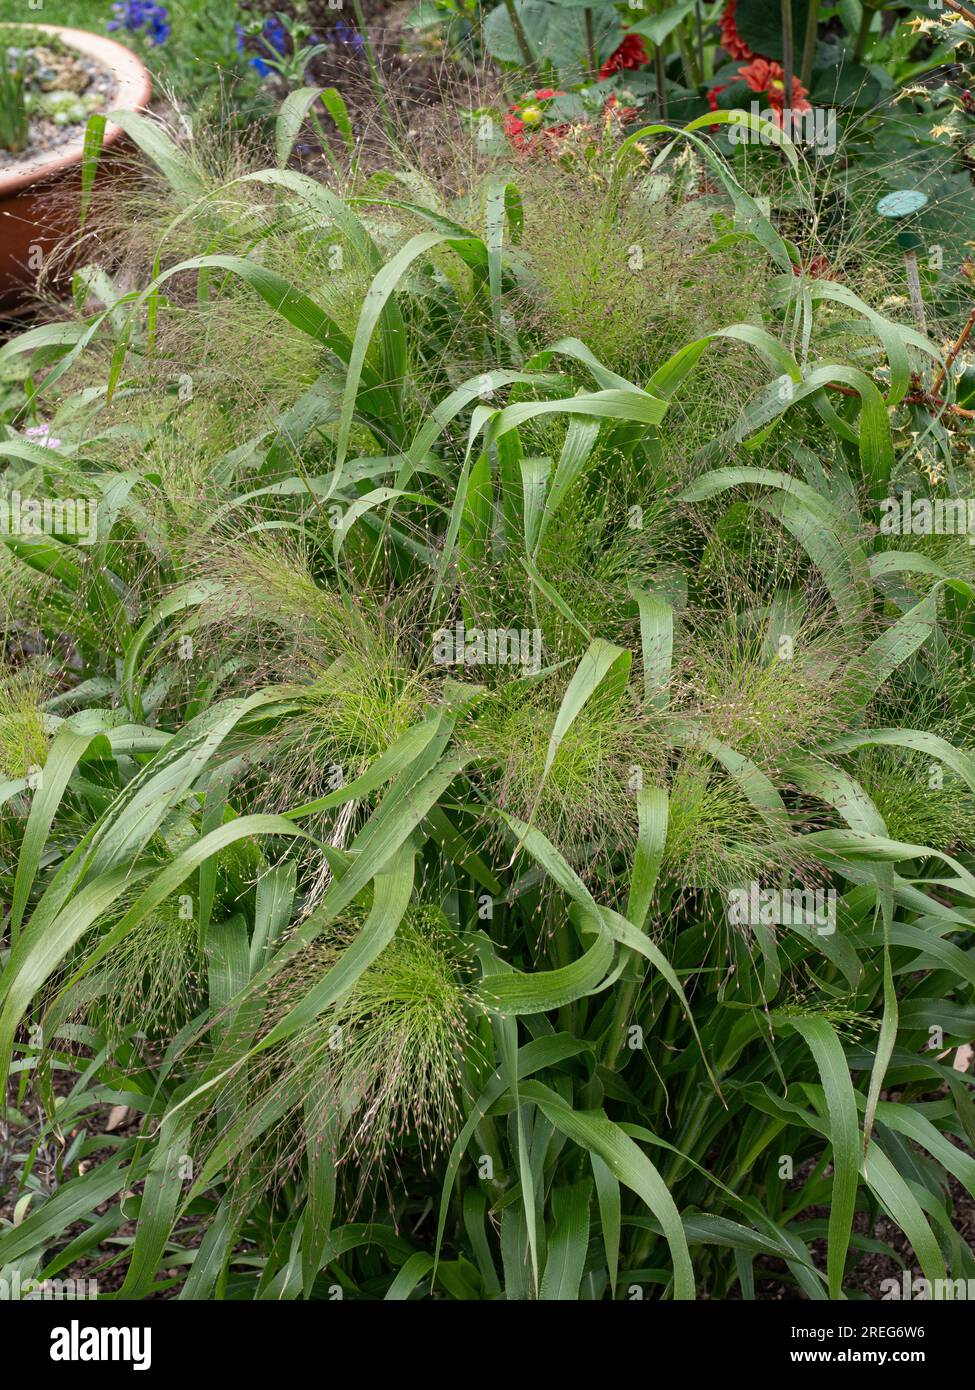 The airy delicate flower heads and lush green leaves of the grass Panicum elegans 'Spinkles' Stock Photo